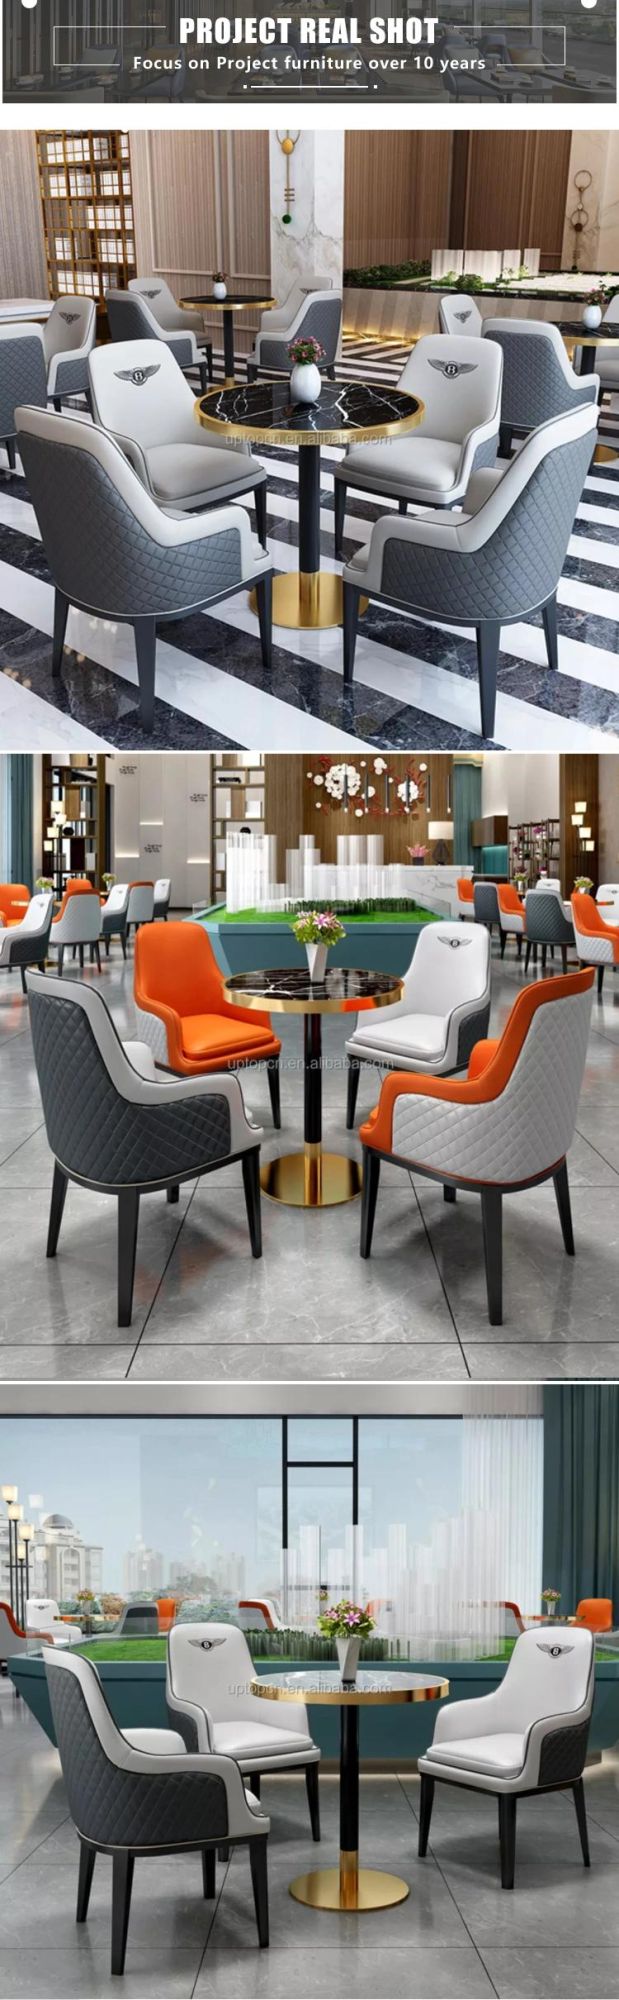 Composable Restaurant Seating PU Leather Fabric Restaurant Booth Restaurant Sofa Hot Sale Dinner Sofa Custom Colors Cafe Booth